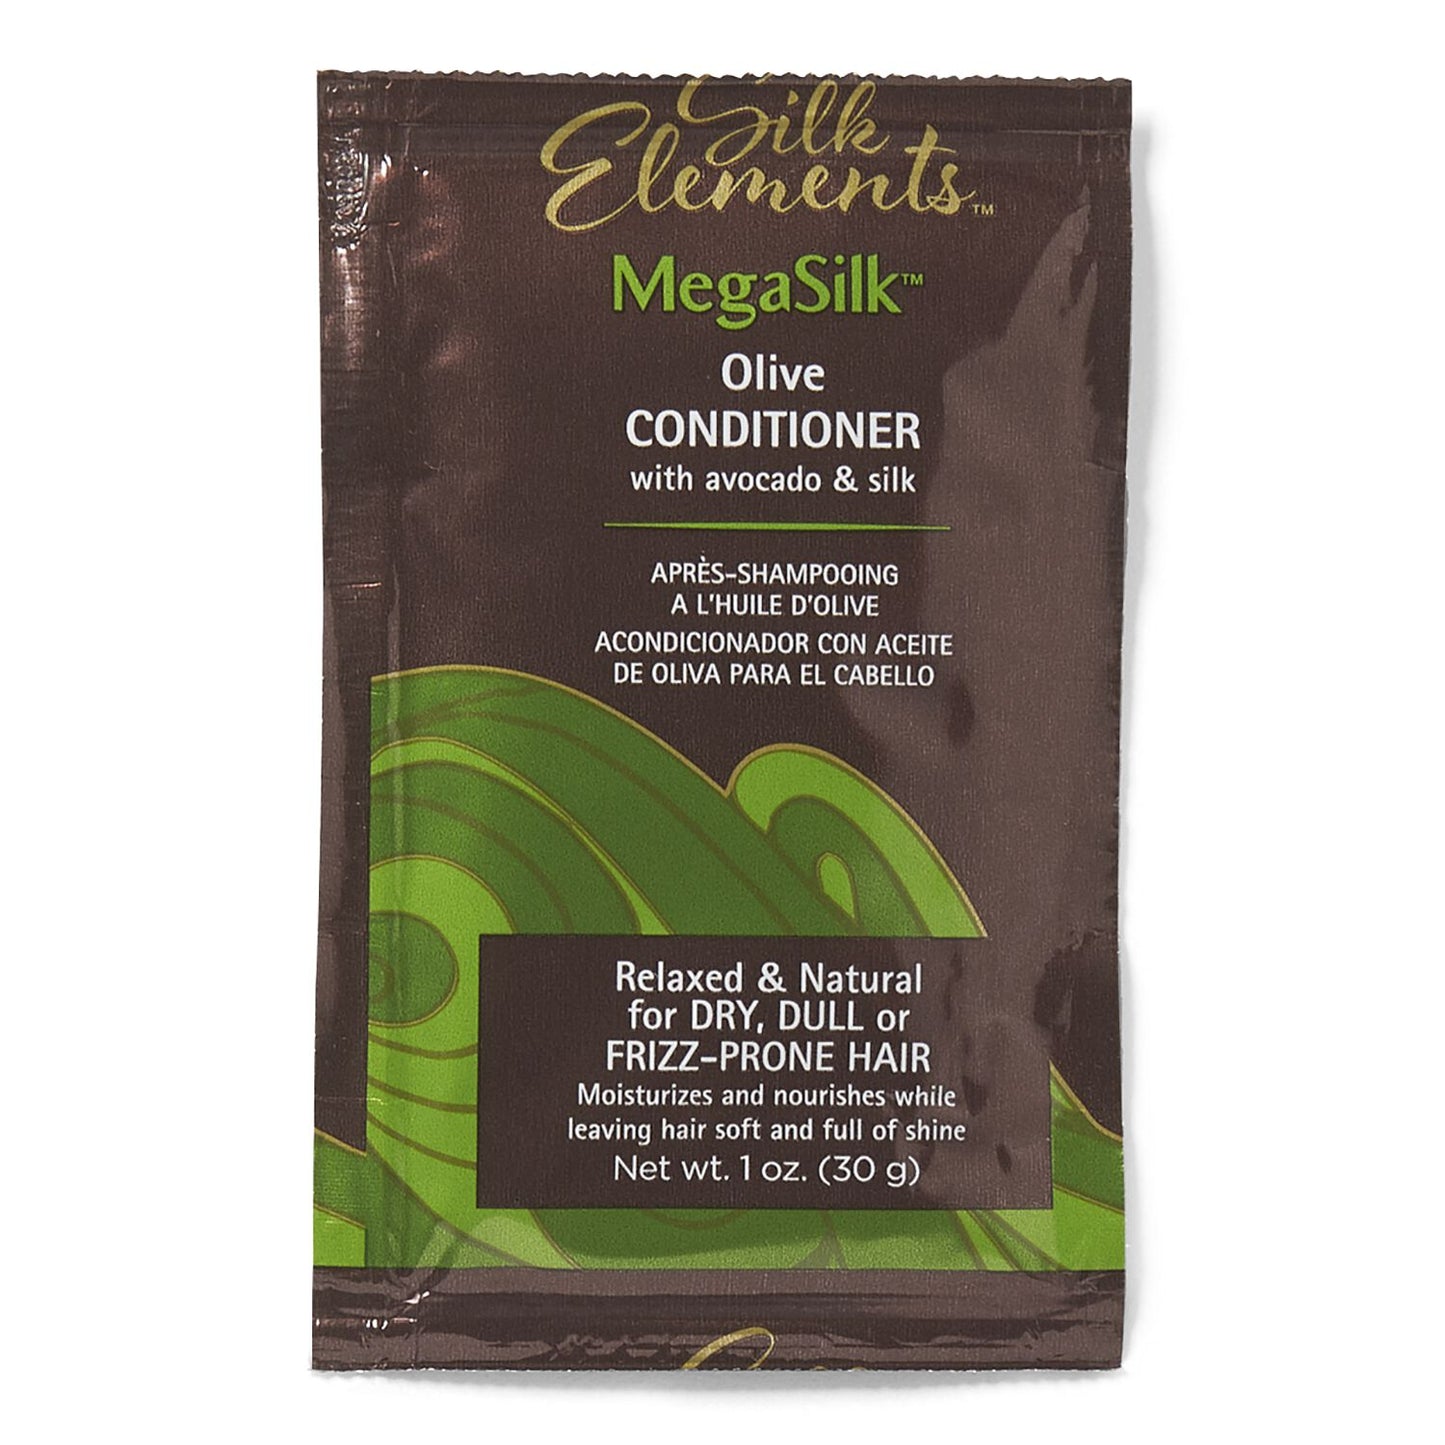 MegaSilk  by   Silk Elements Olive Conditioner Packette